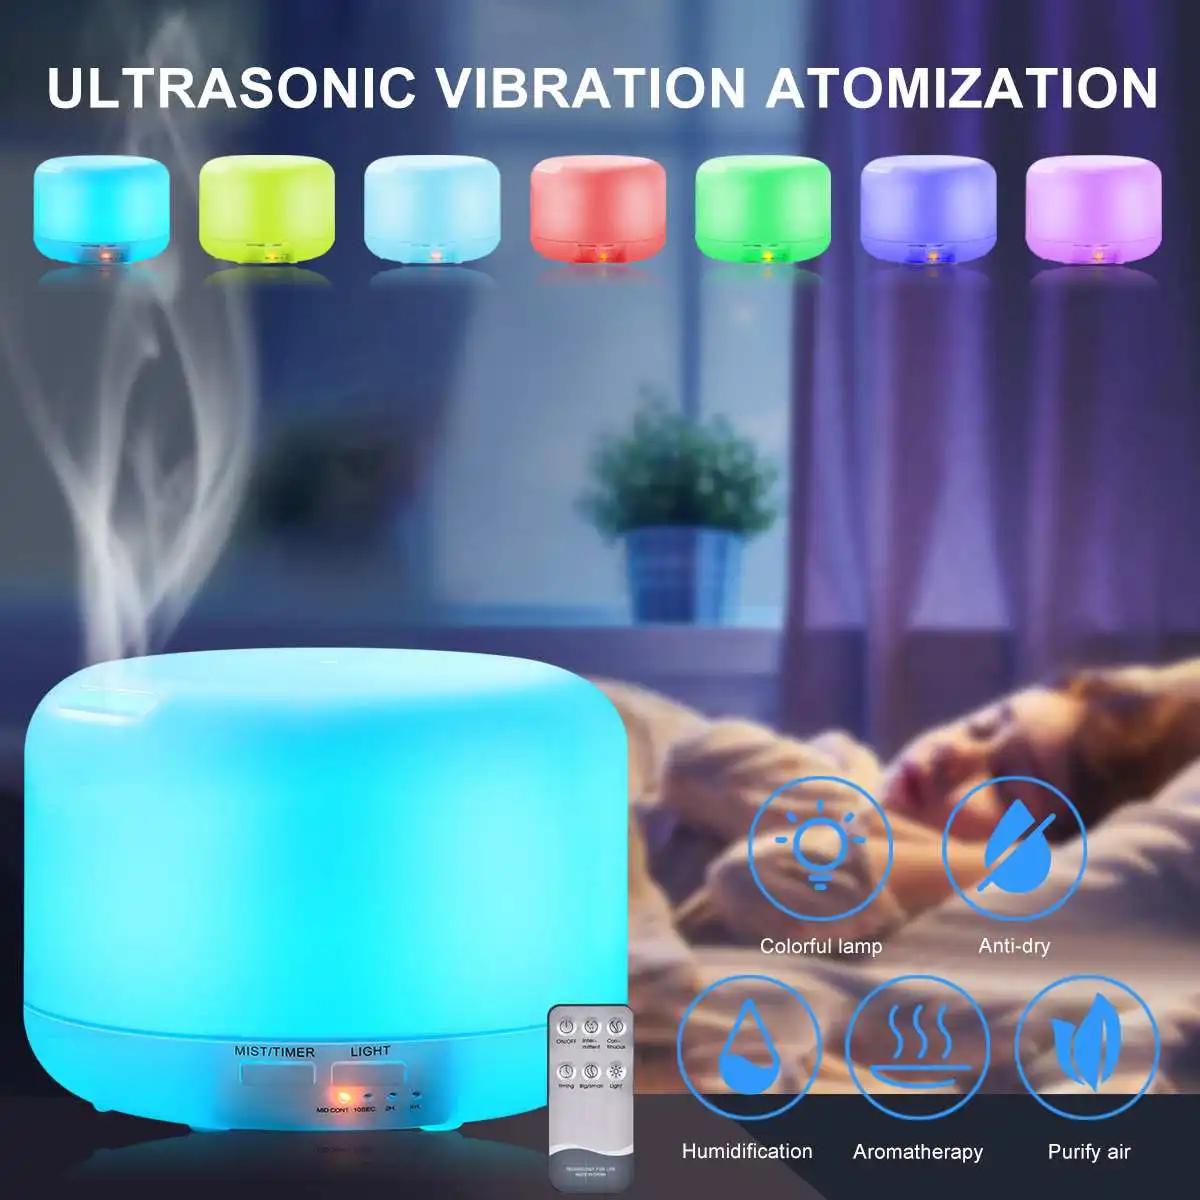 

300ml Aromatherapy Humidifier Aroma LED Oil Diffuser Remote Control Air Purifier EU Plug 12W for Home Yoga Office 36dB 7 Colors